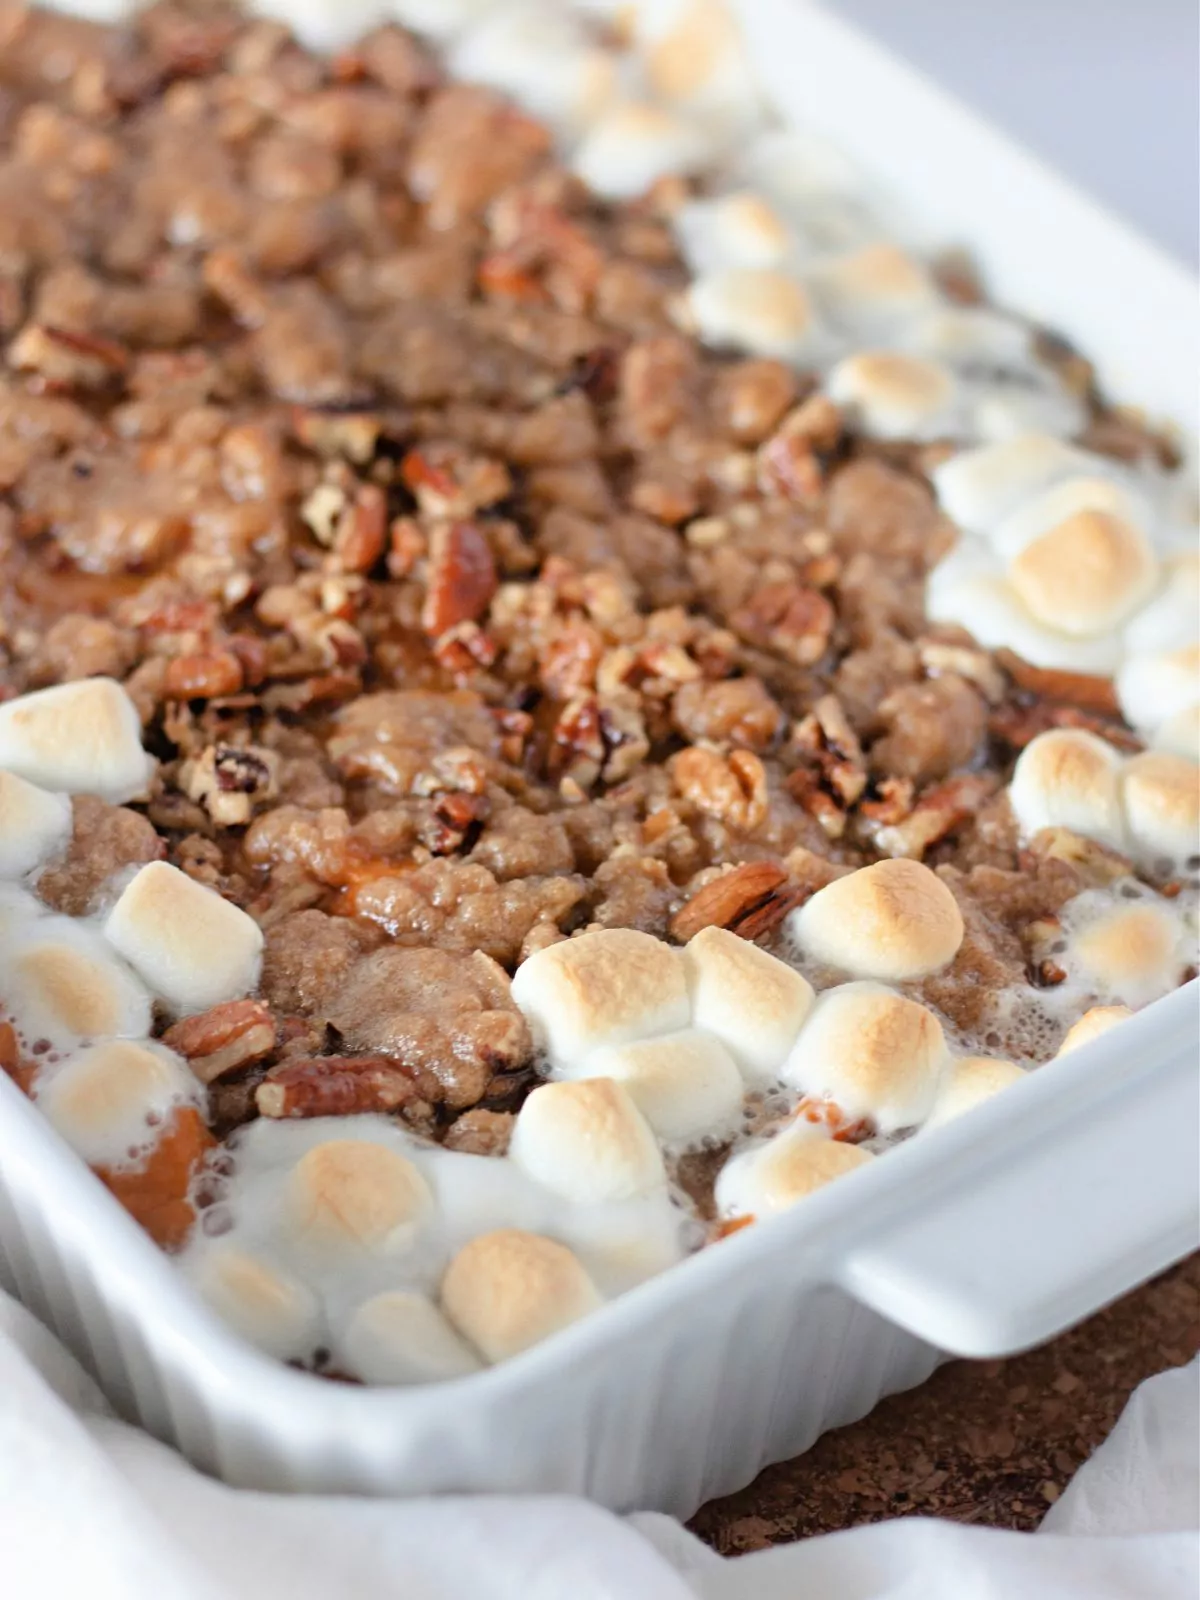 sweet potato casserole in white dish with marshmallows.